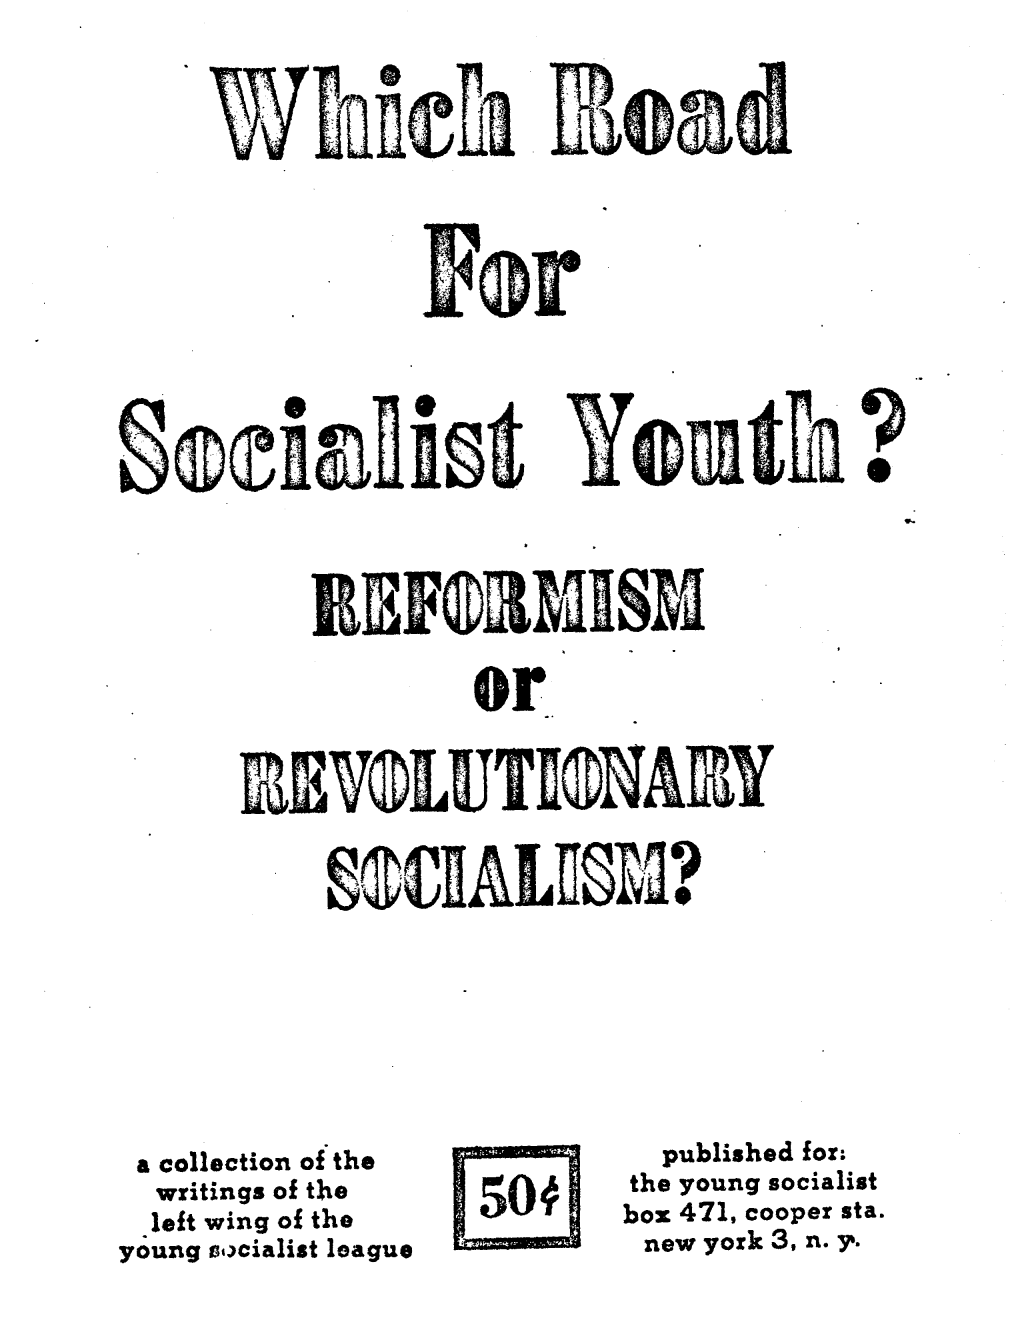 A Collection of the Writings of the Left Wing Ol the Young Socialist League